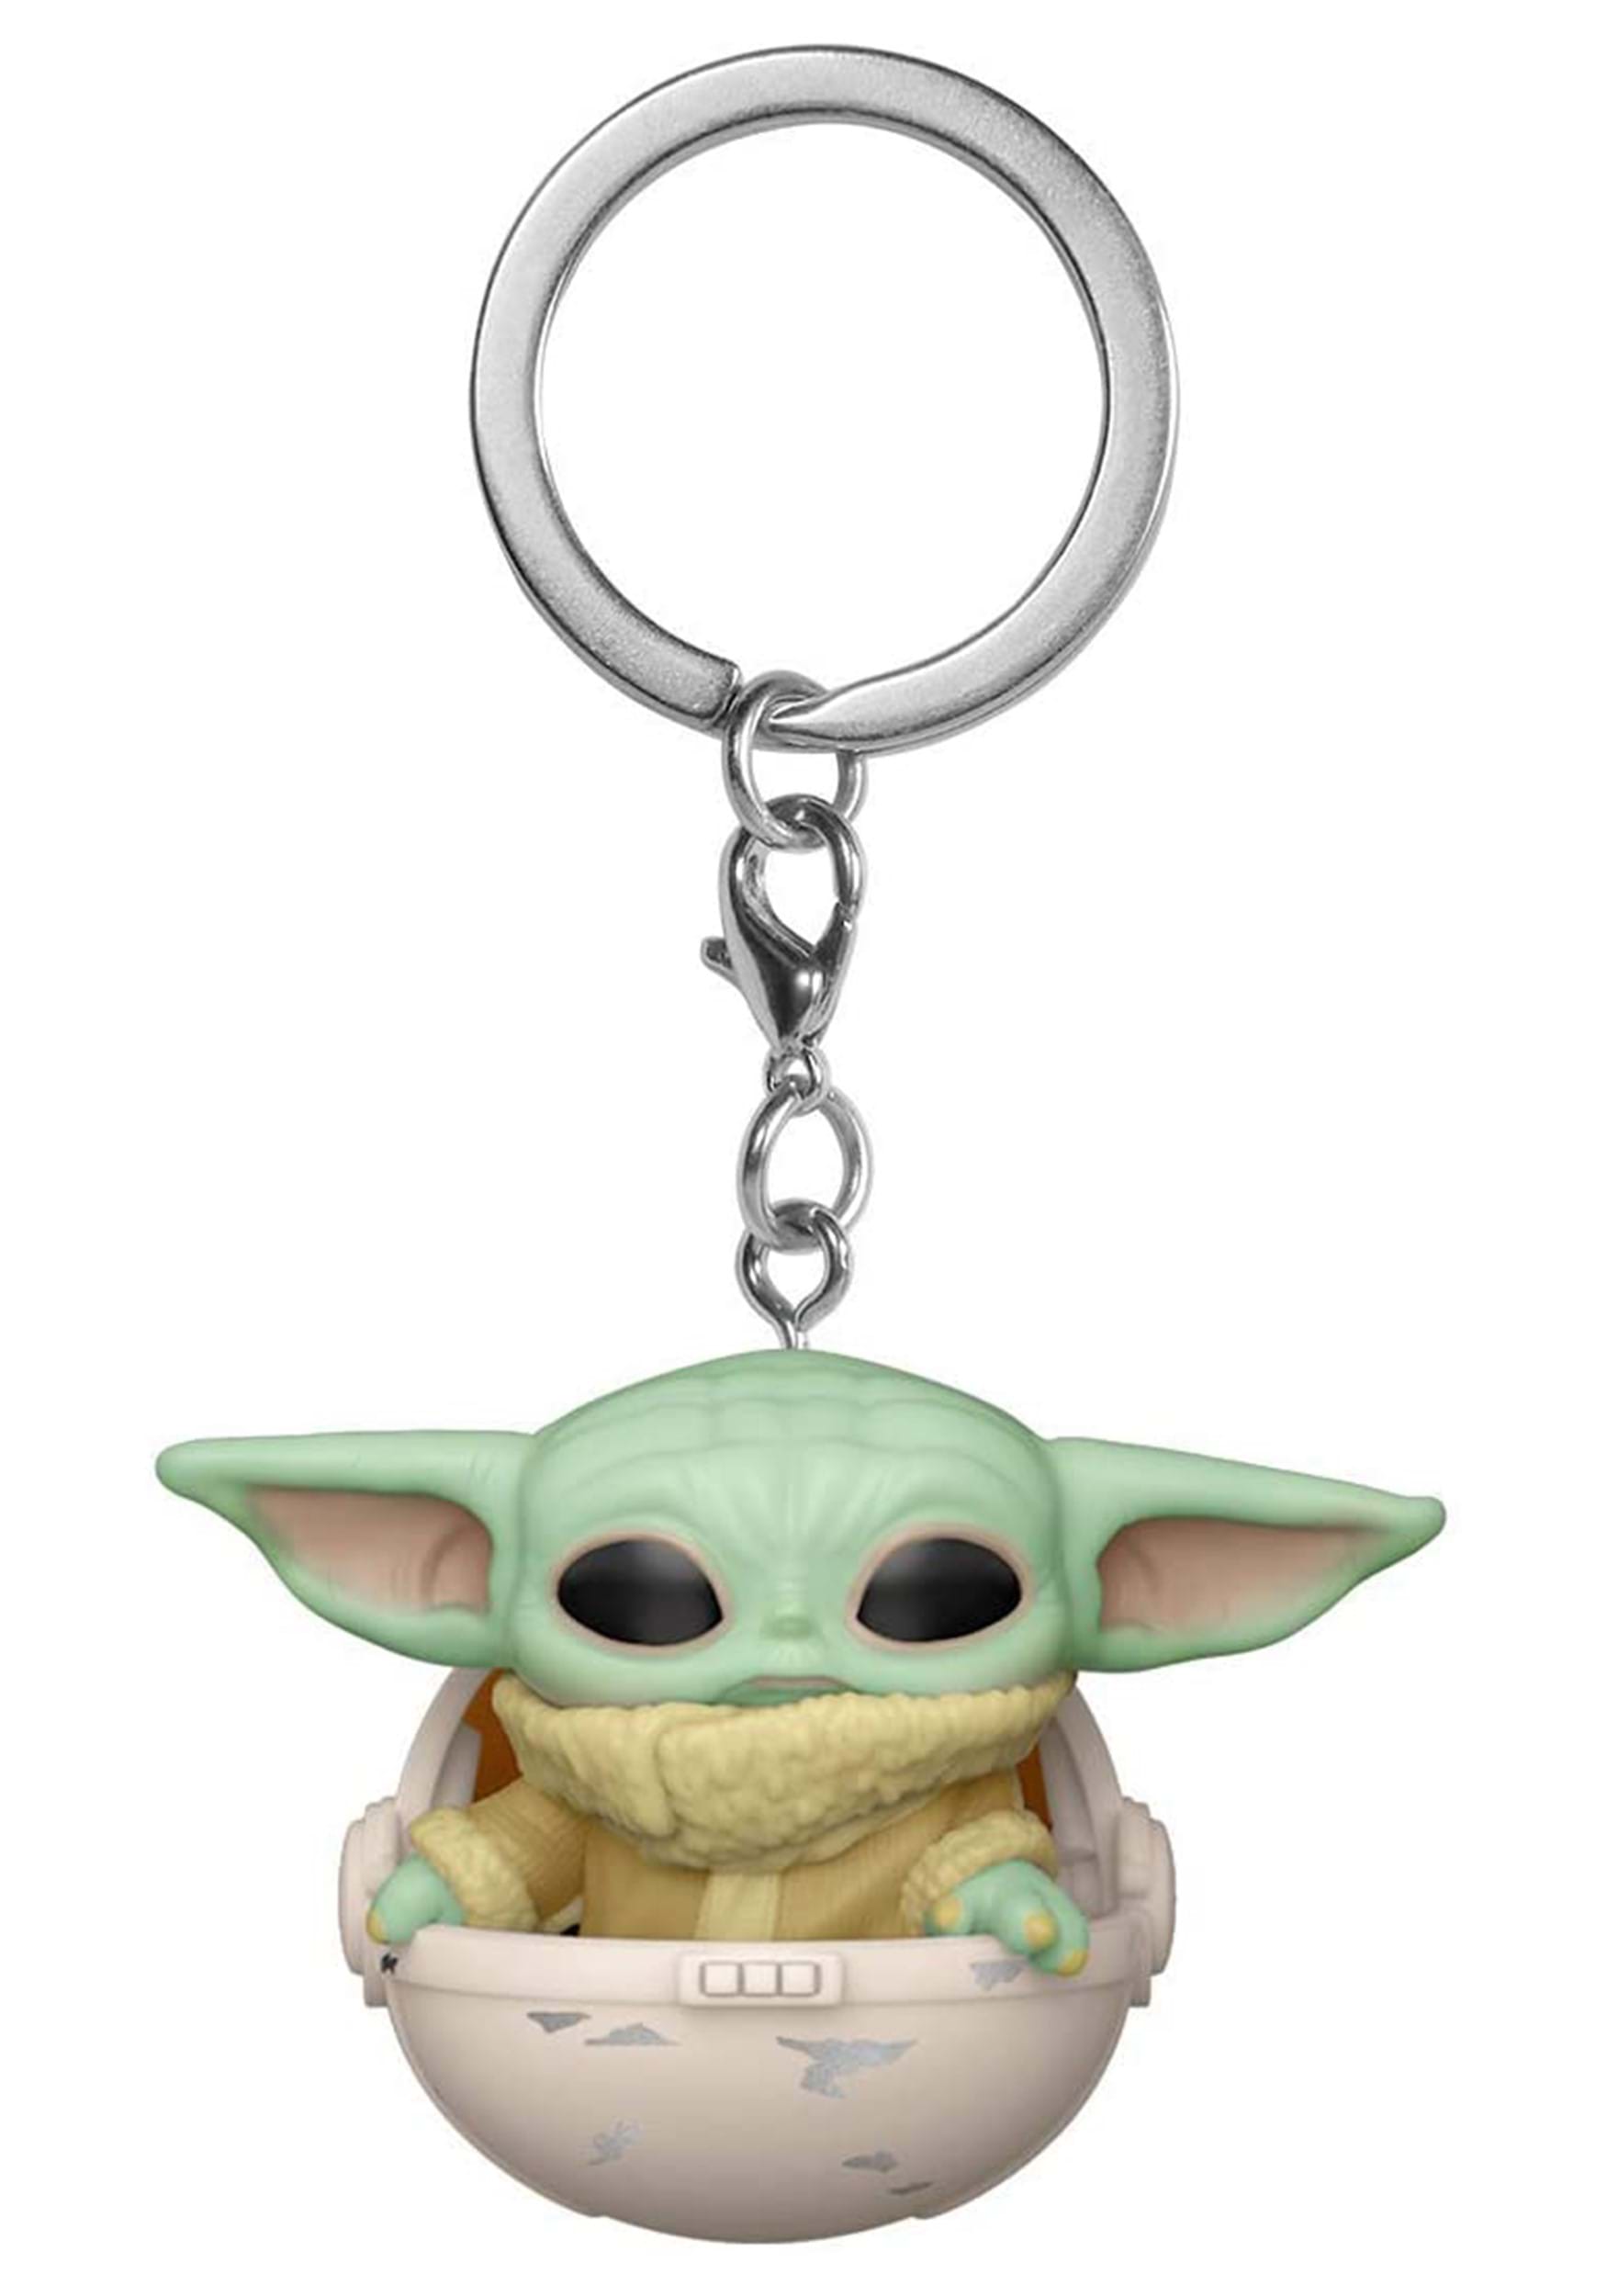 https://images.fun.com/products/71192/1-1/pop-keychain-star-wars-the-mandalorian-the-child-in-a-canist.jpg